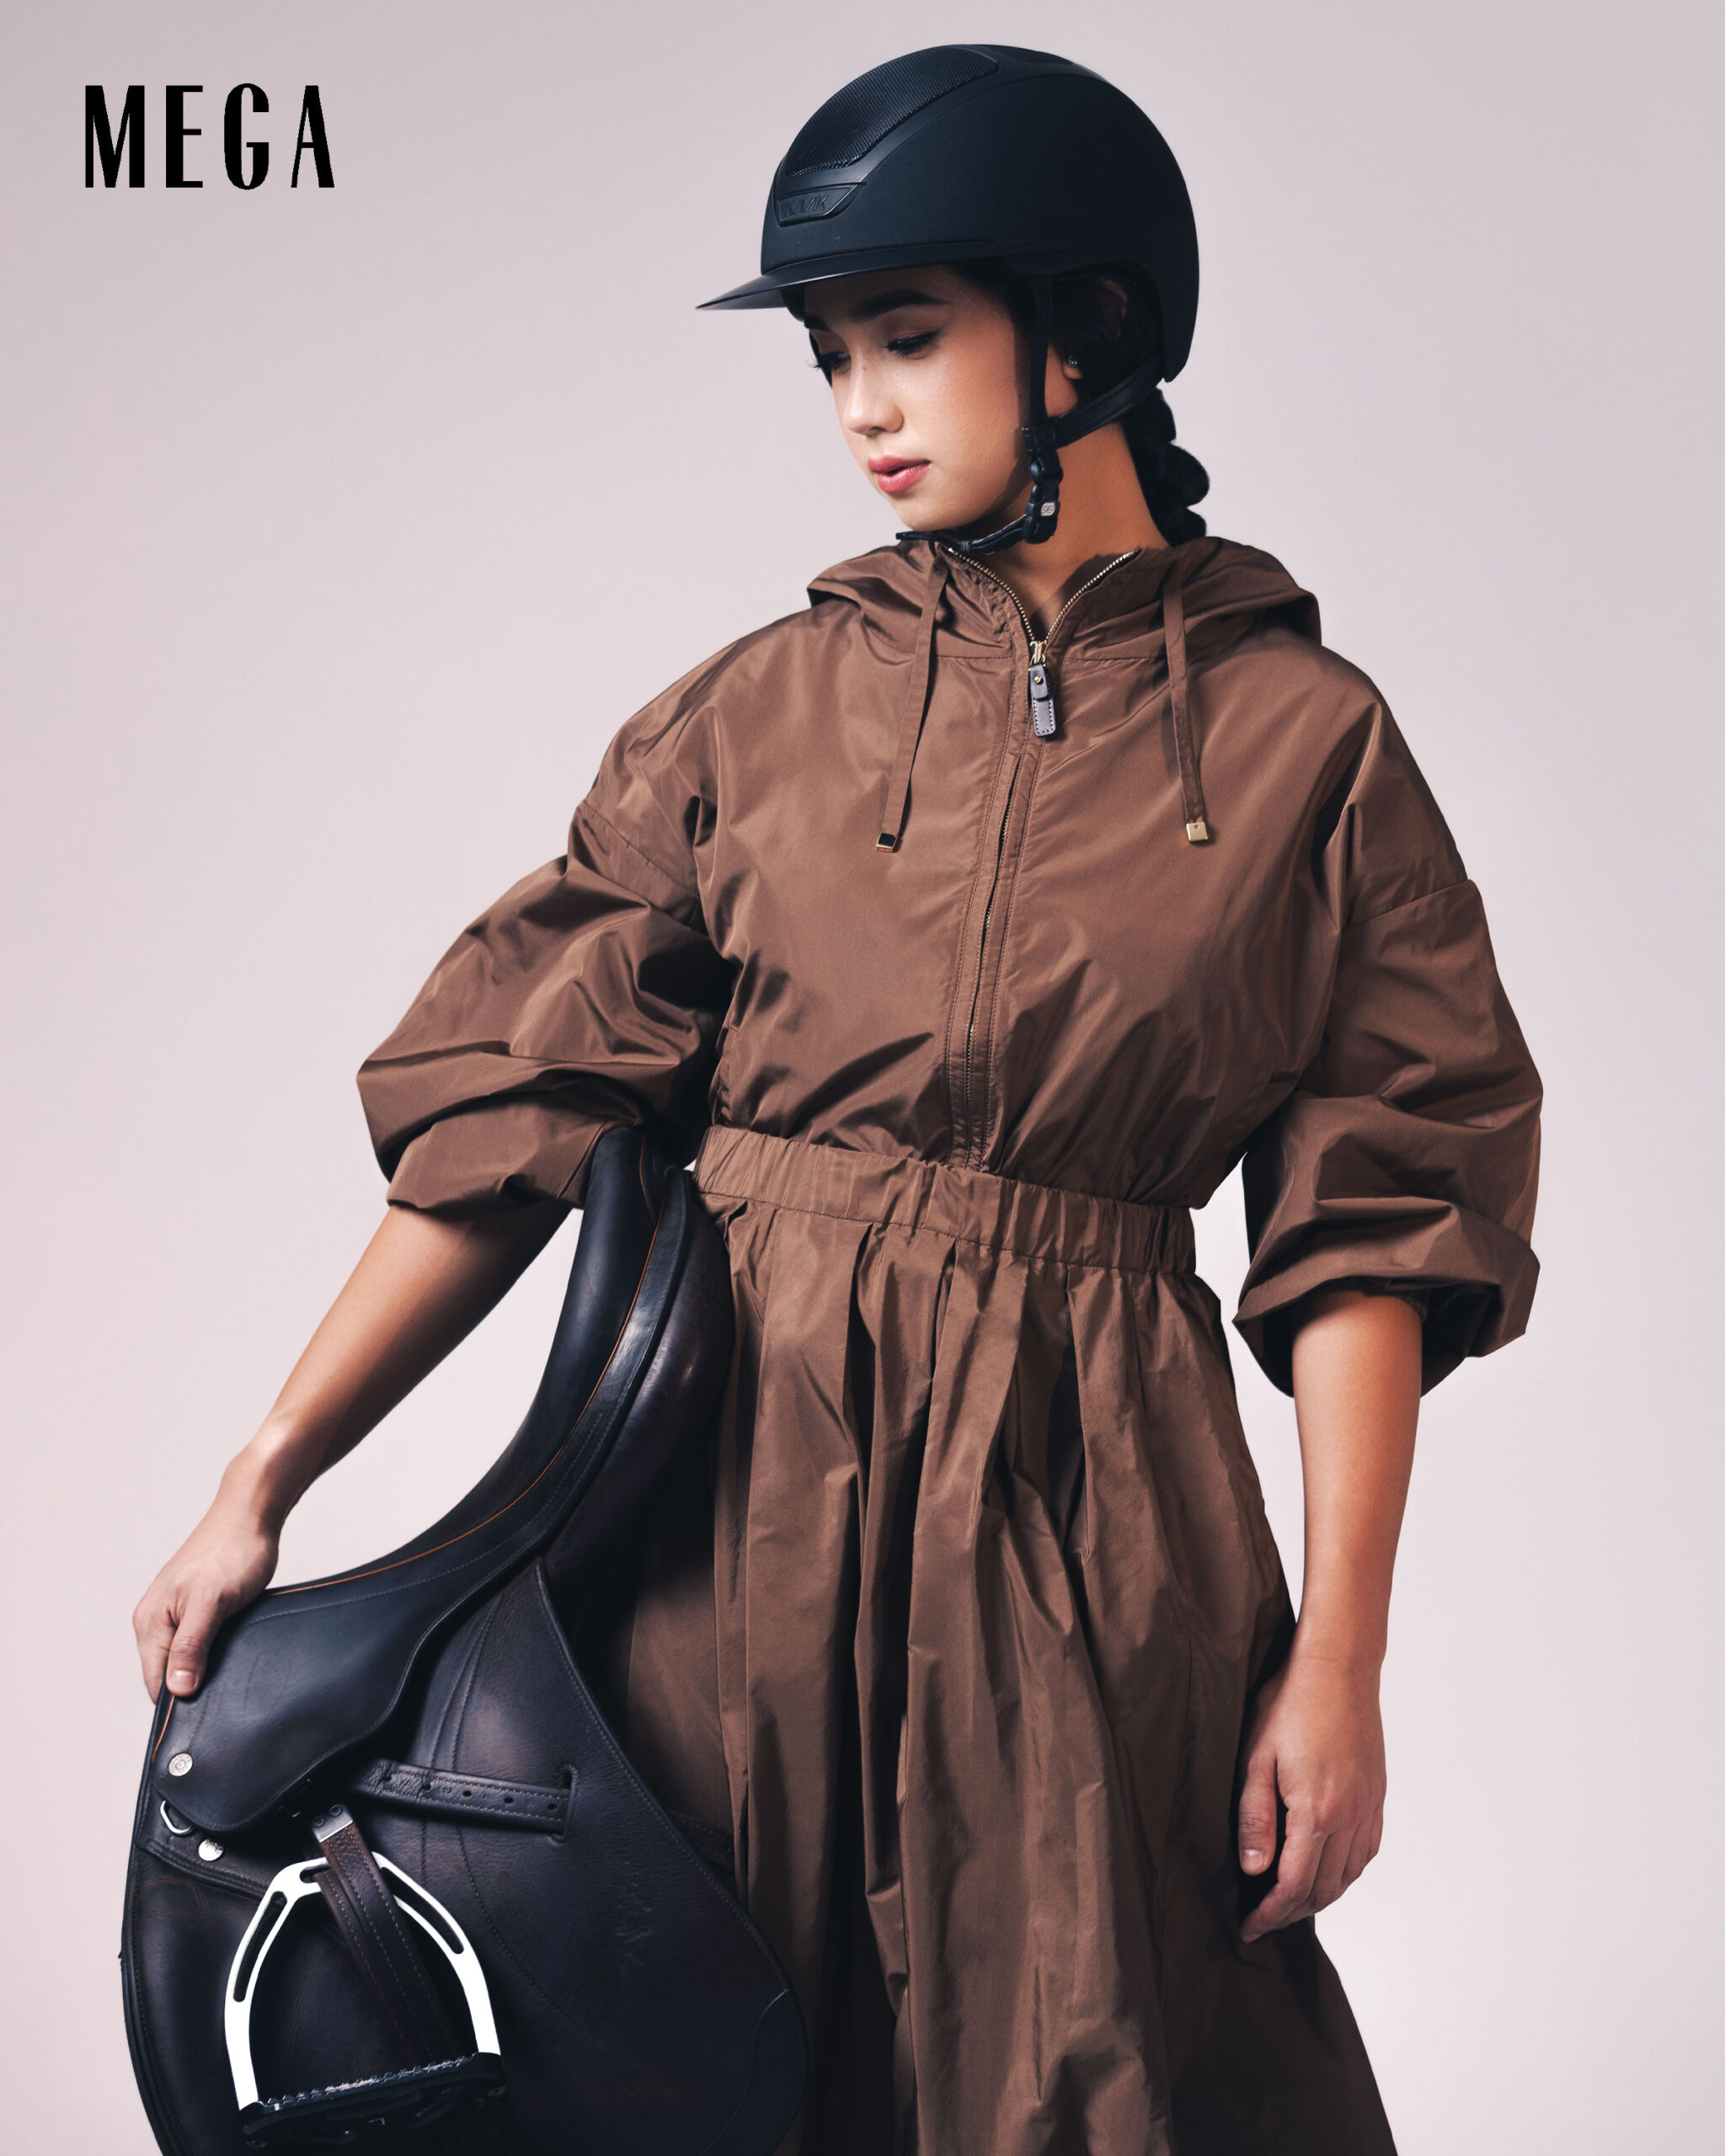 A fashionable twist to her equestrian essentials, Lorenzo wears a MAX MARA top and skirt